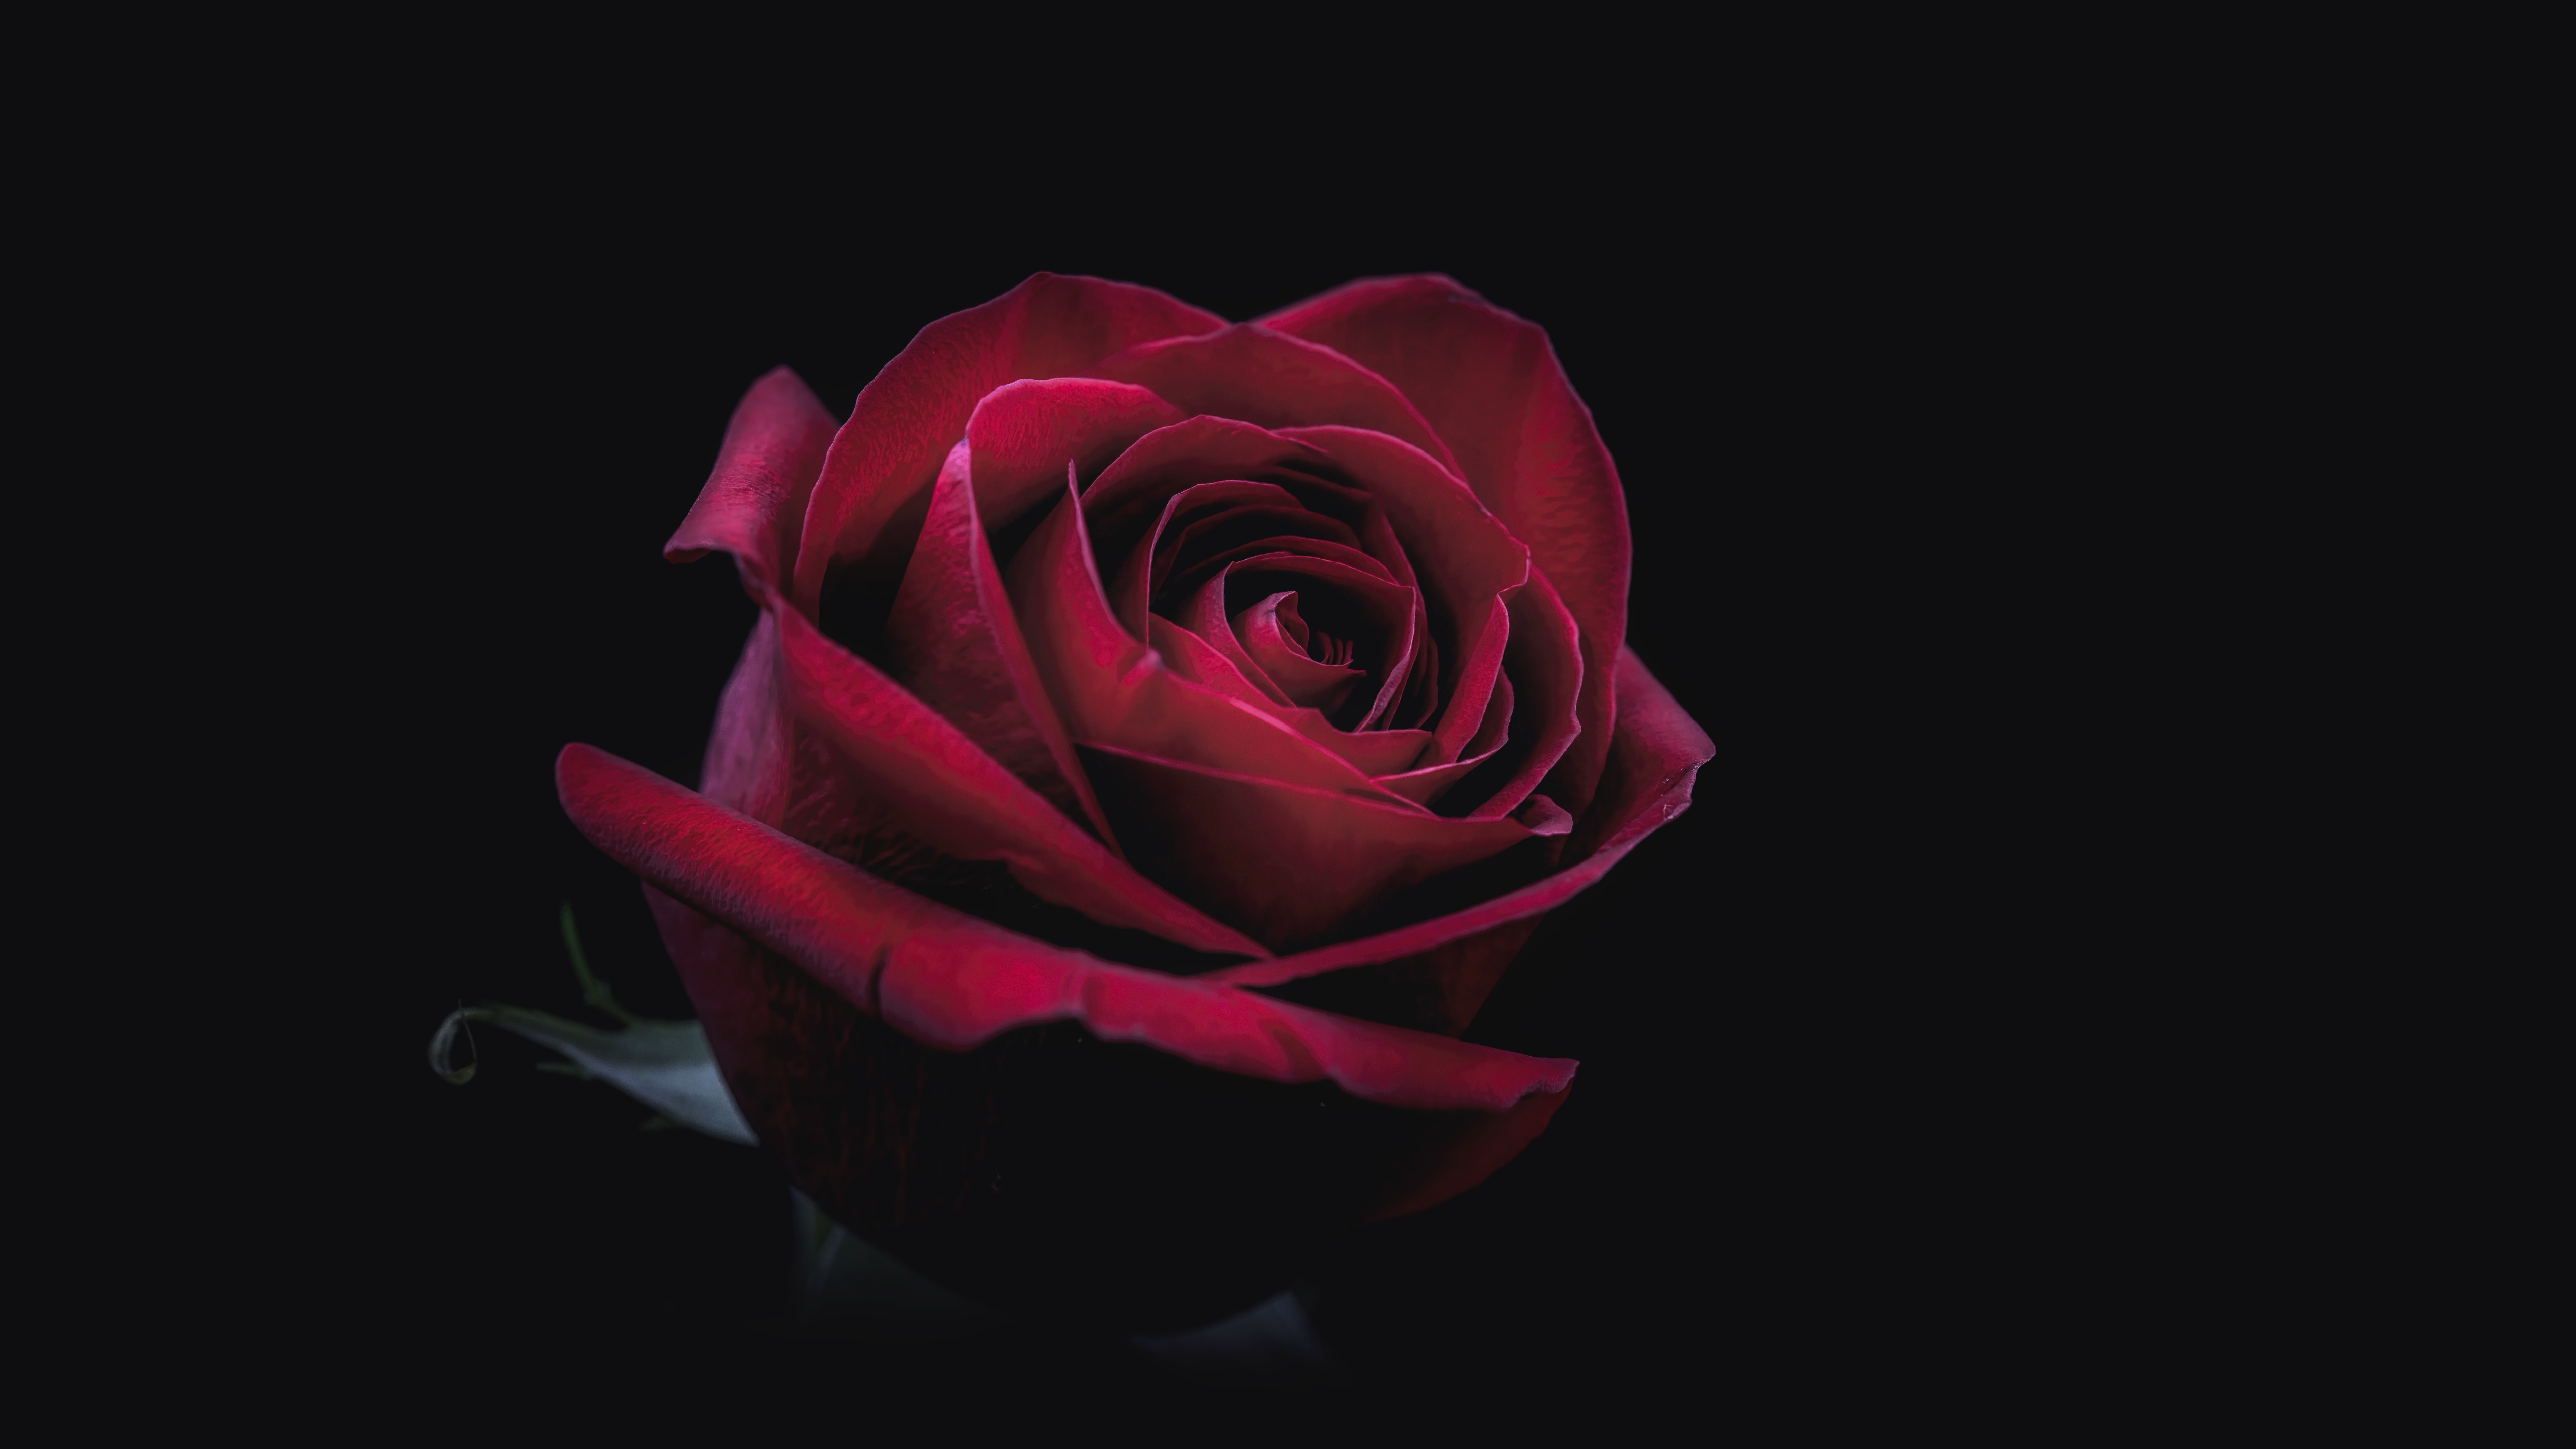 7680x4320 Rose Oled 8k 8k Hd 4k Wallpapers Images Backgrounds Photos And Pictures